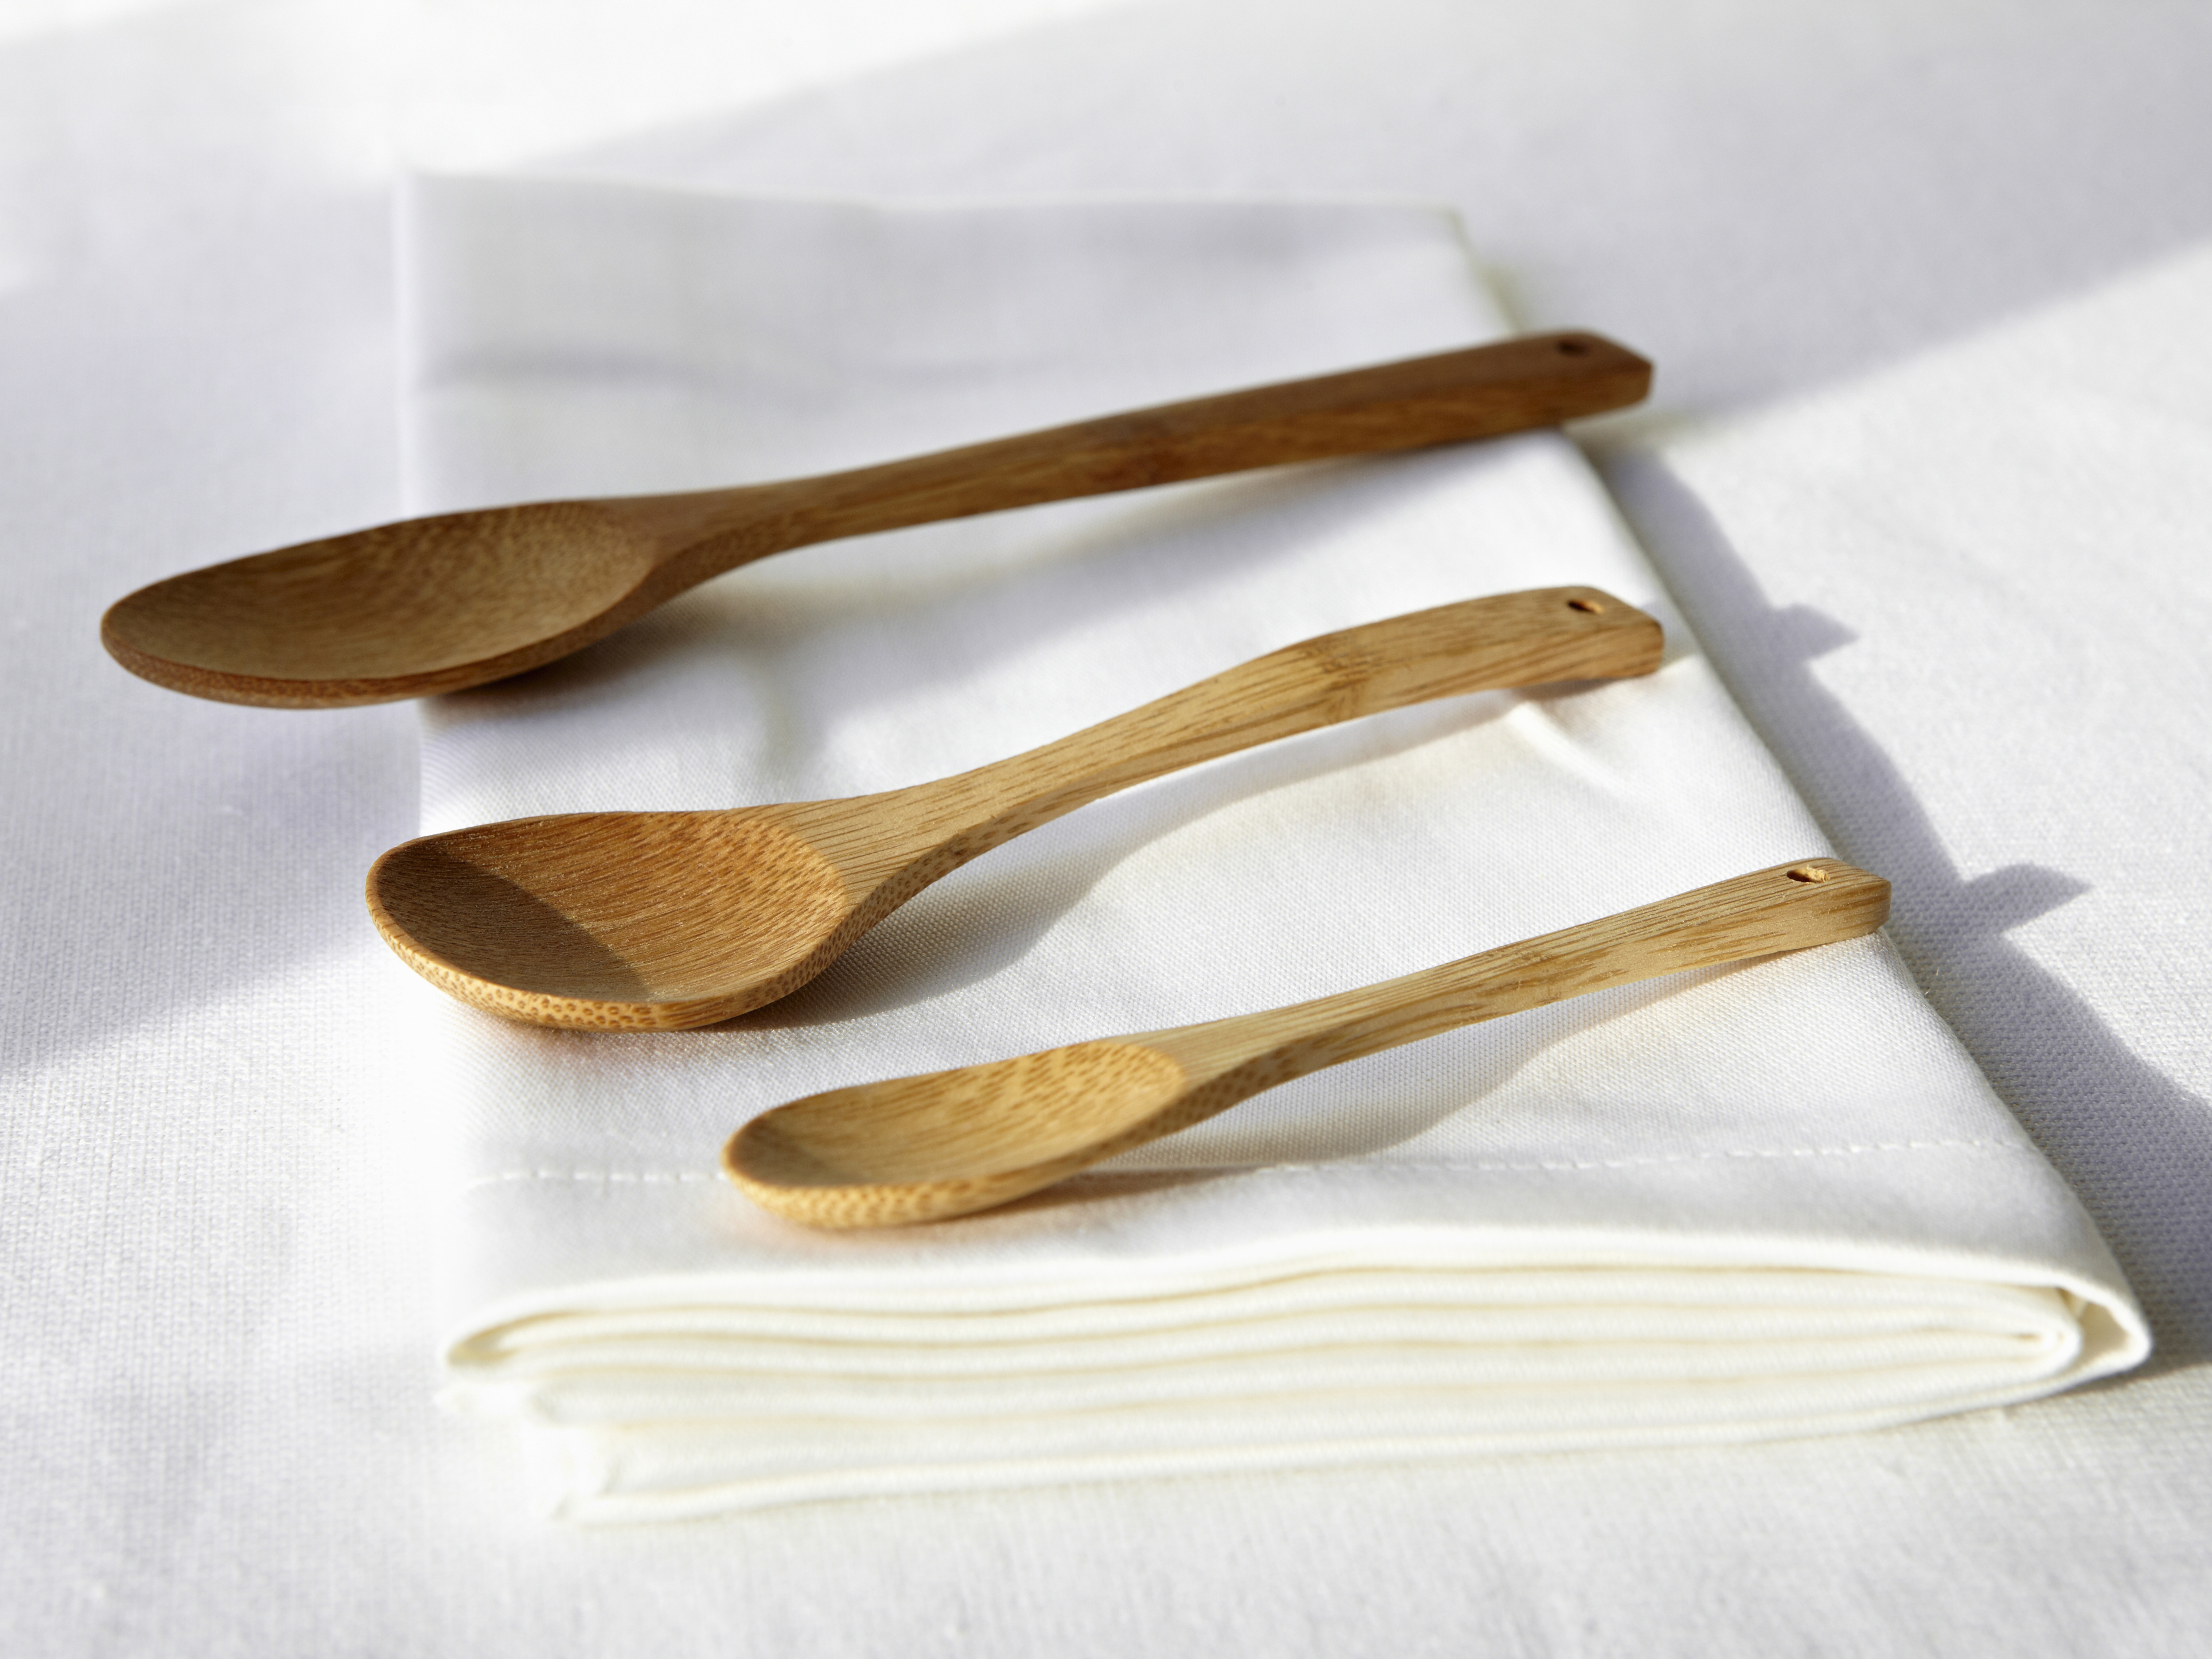 Wood spoons treated with walnut oil, mineral oil, coconut oil and